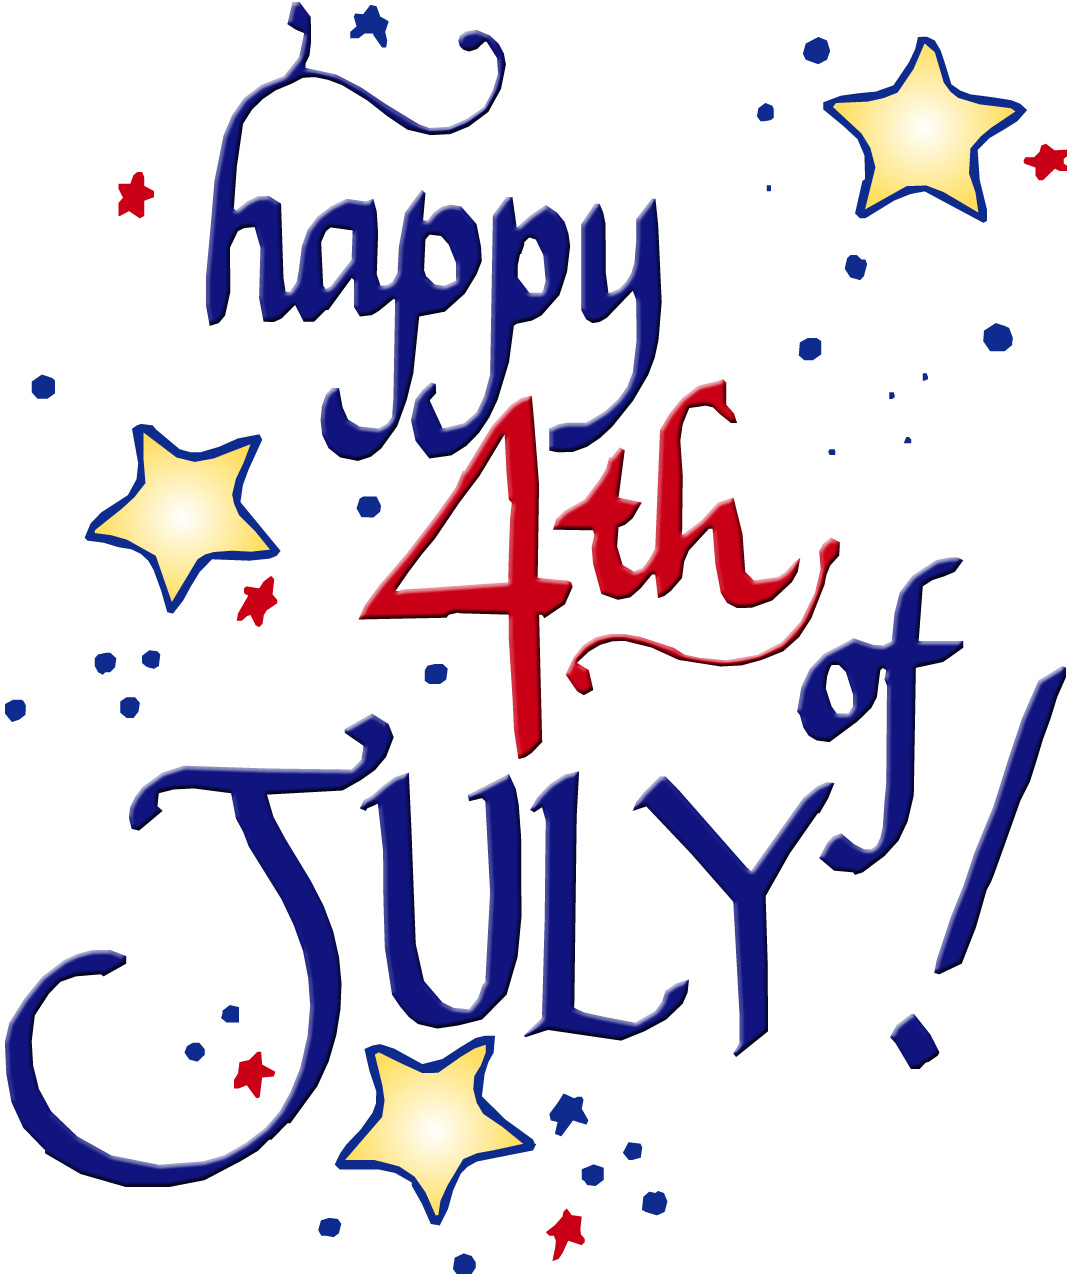 free clipart images 4th of july - photo #5